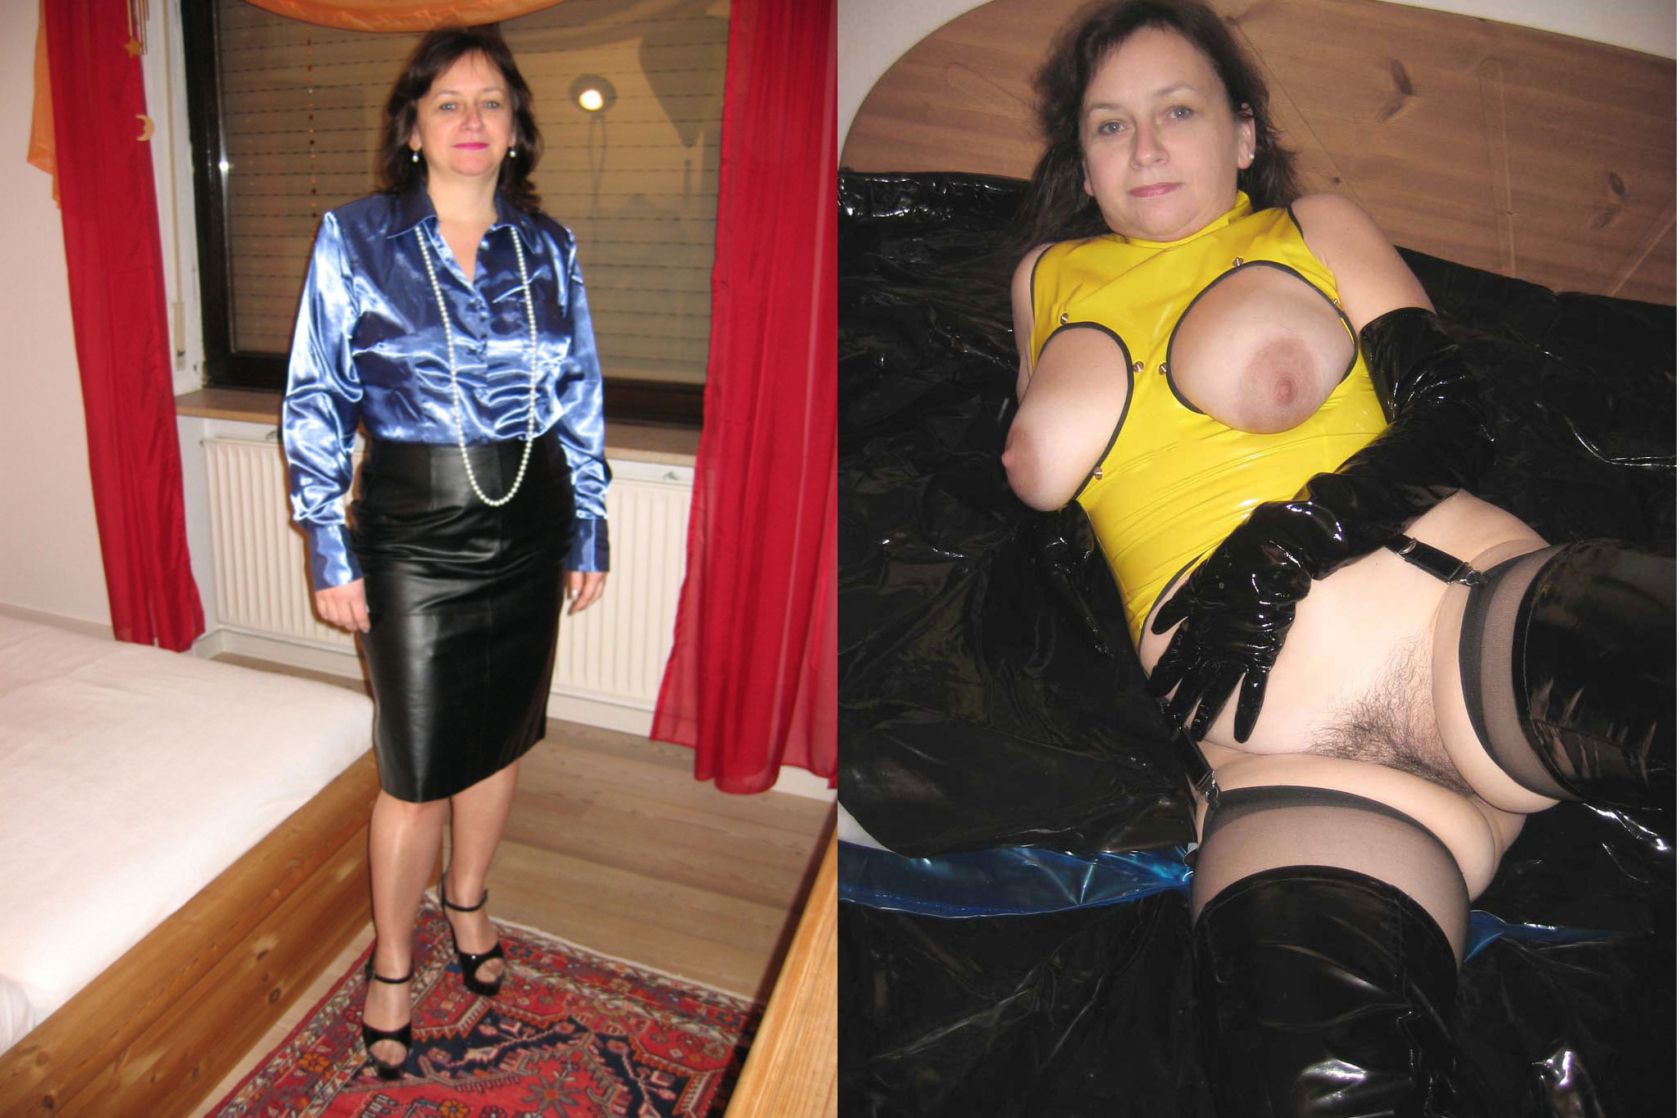 sandra_clothed_unclothed01